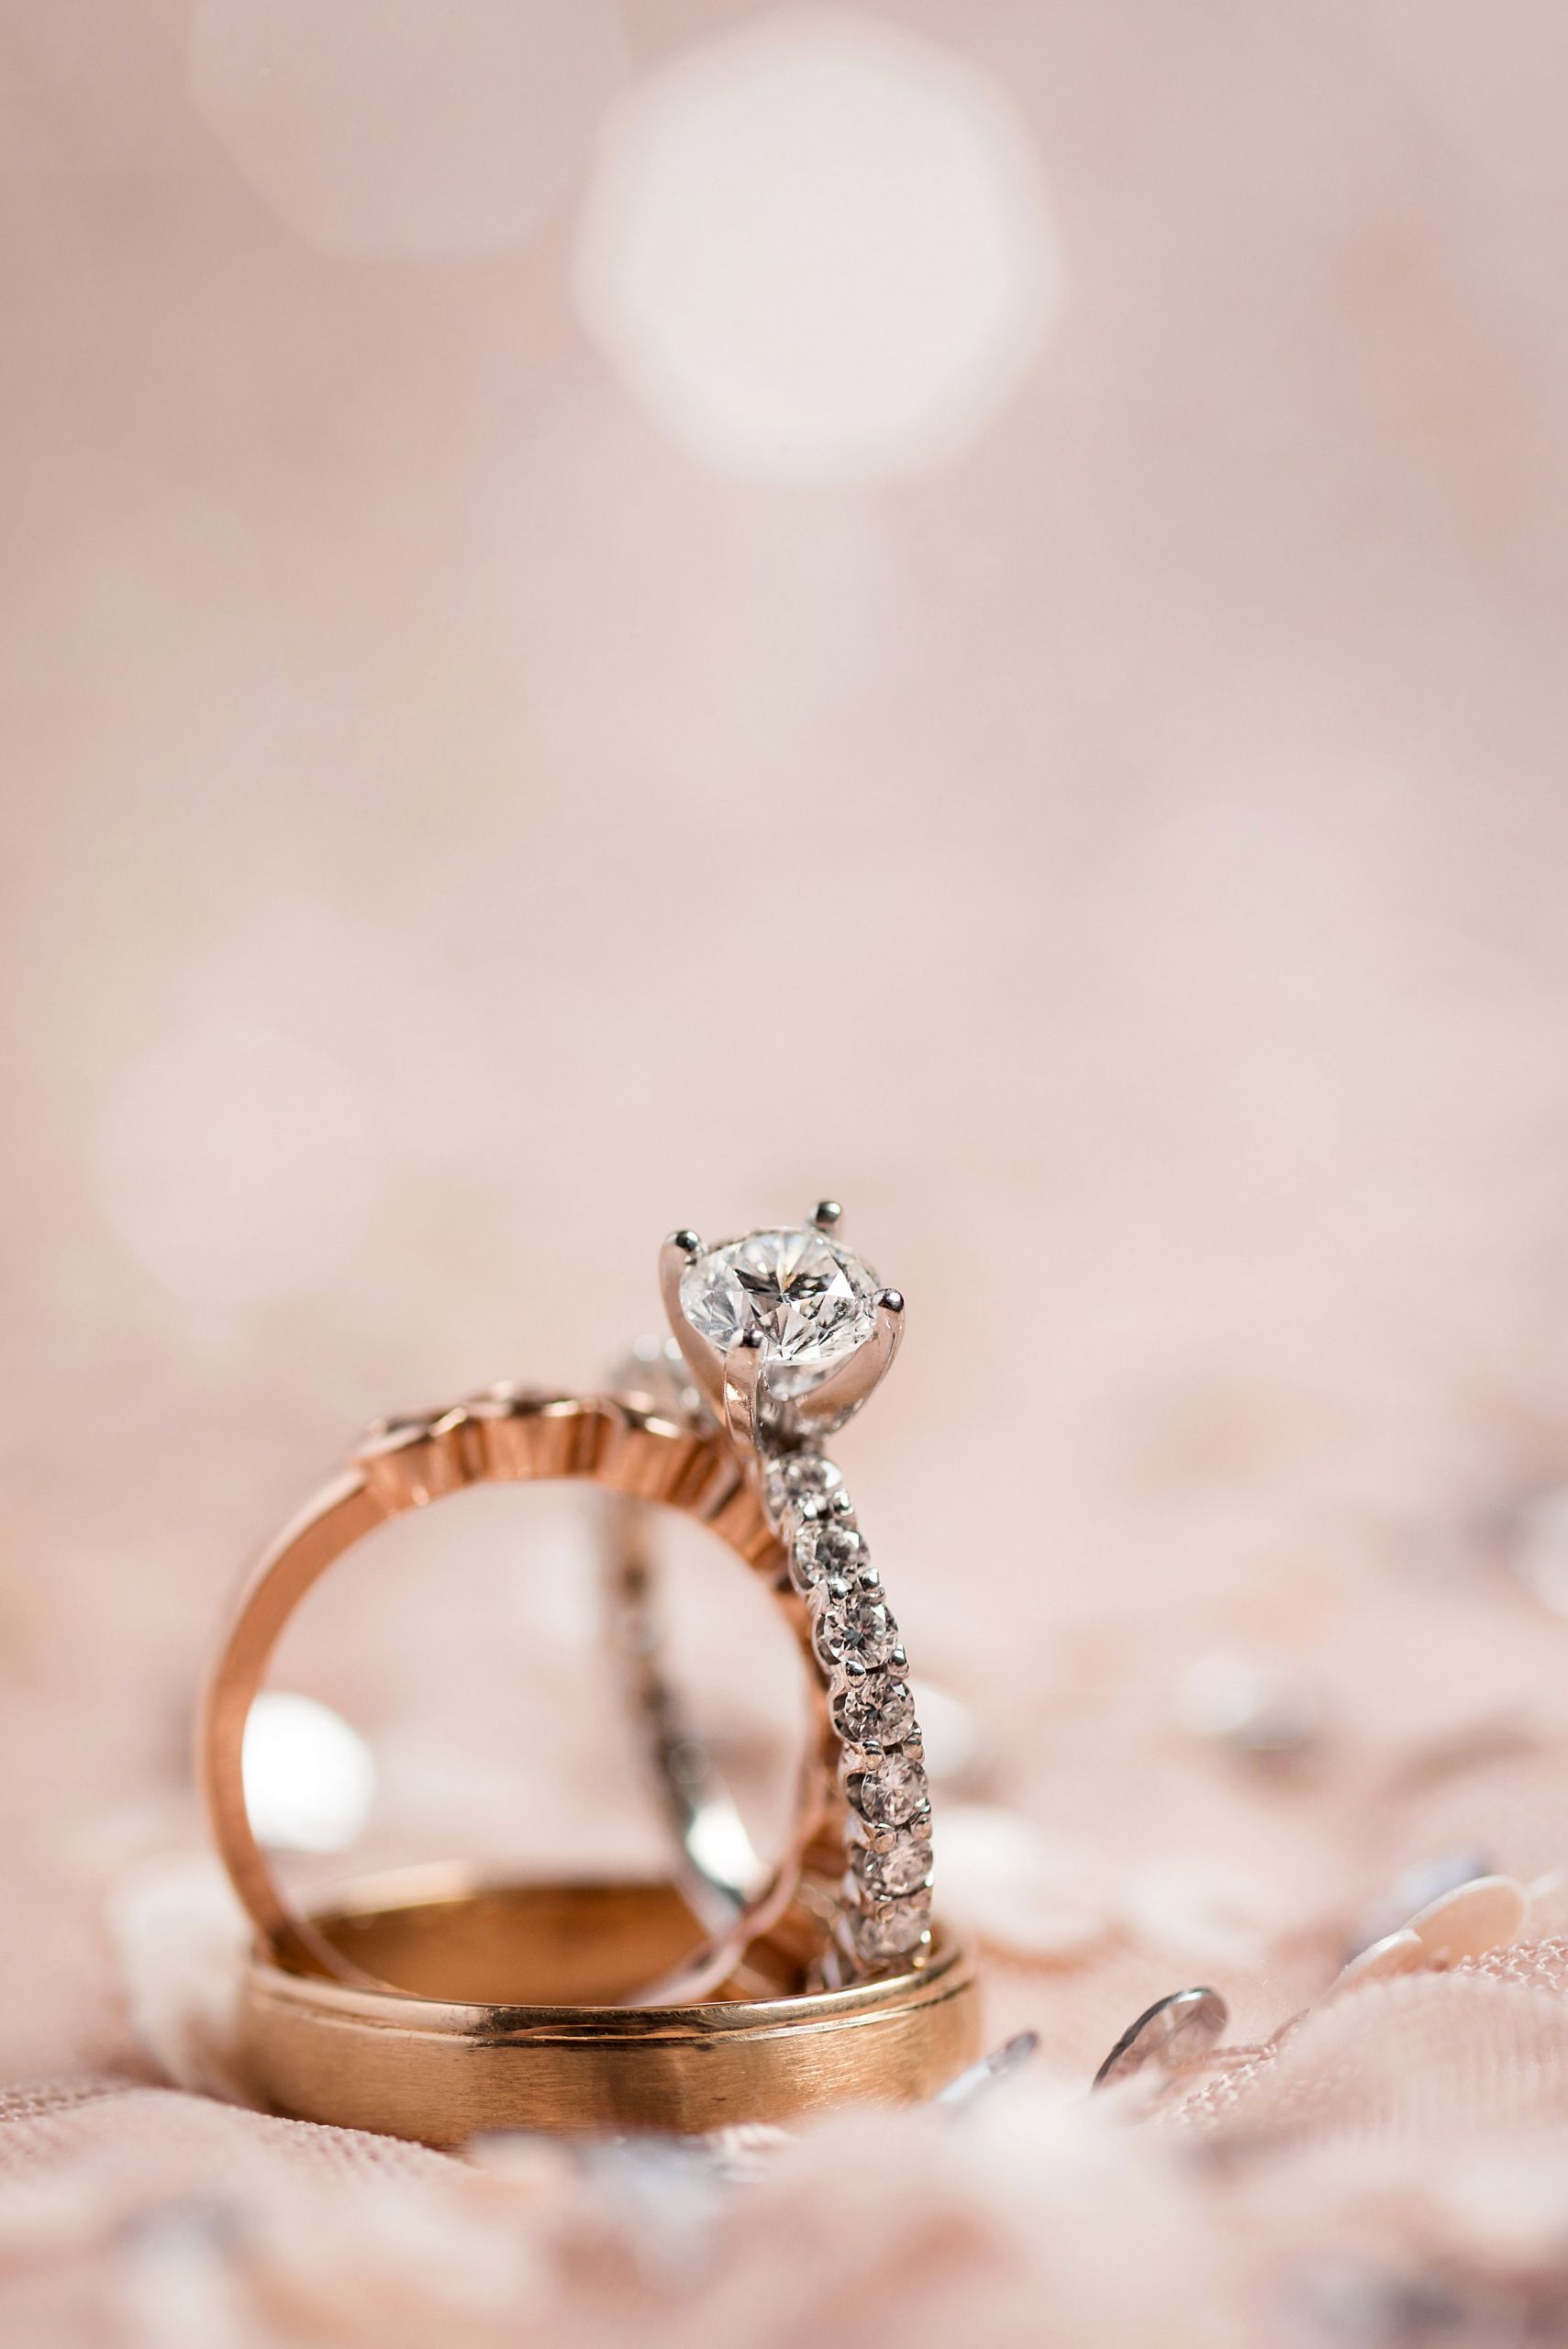 Wedding Ring Photography
 Top 10 Favorite Engagement Rings by Ashley Fisher